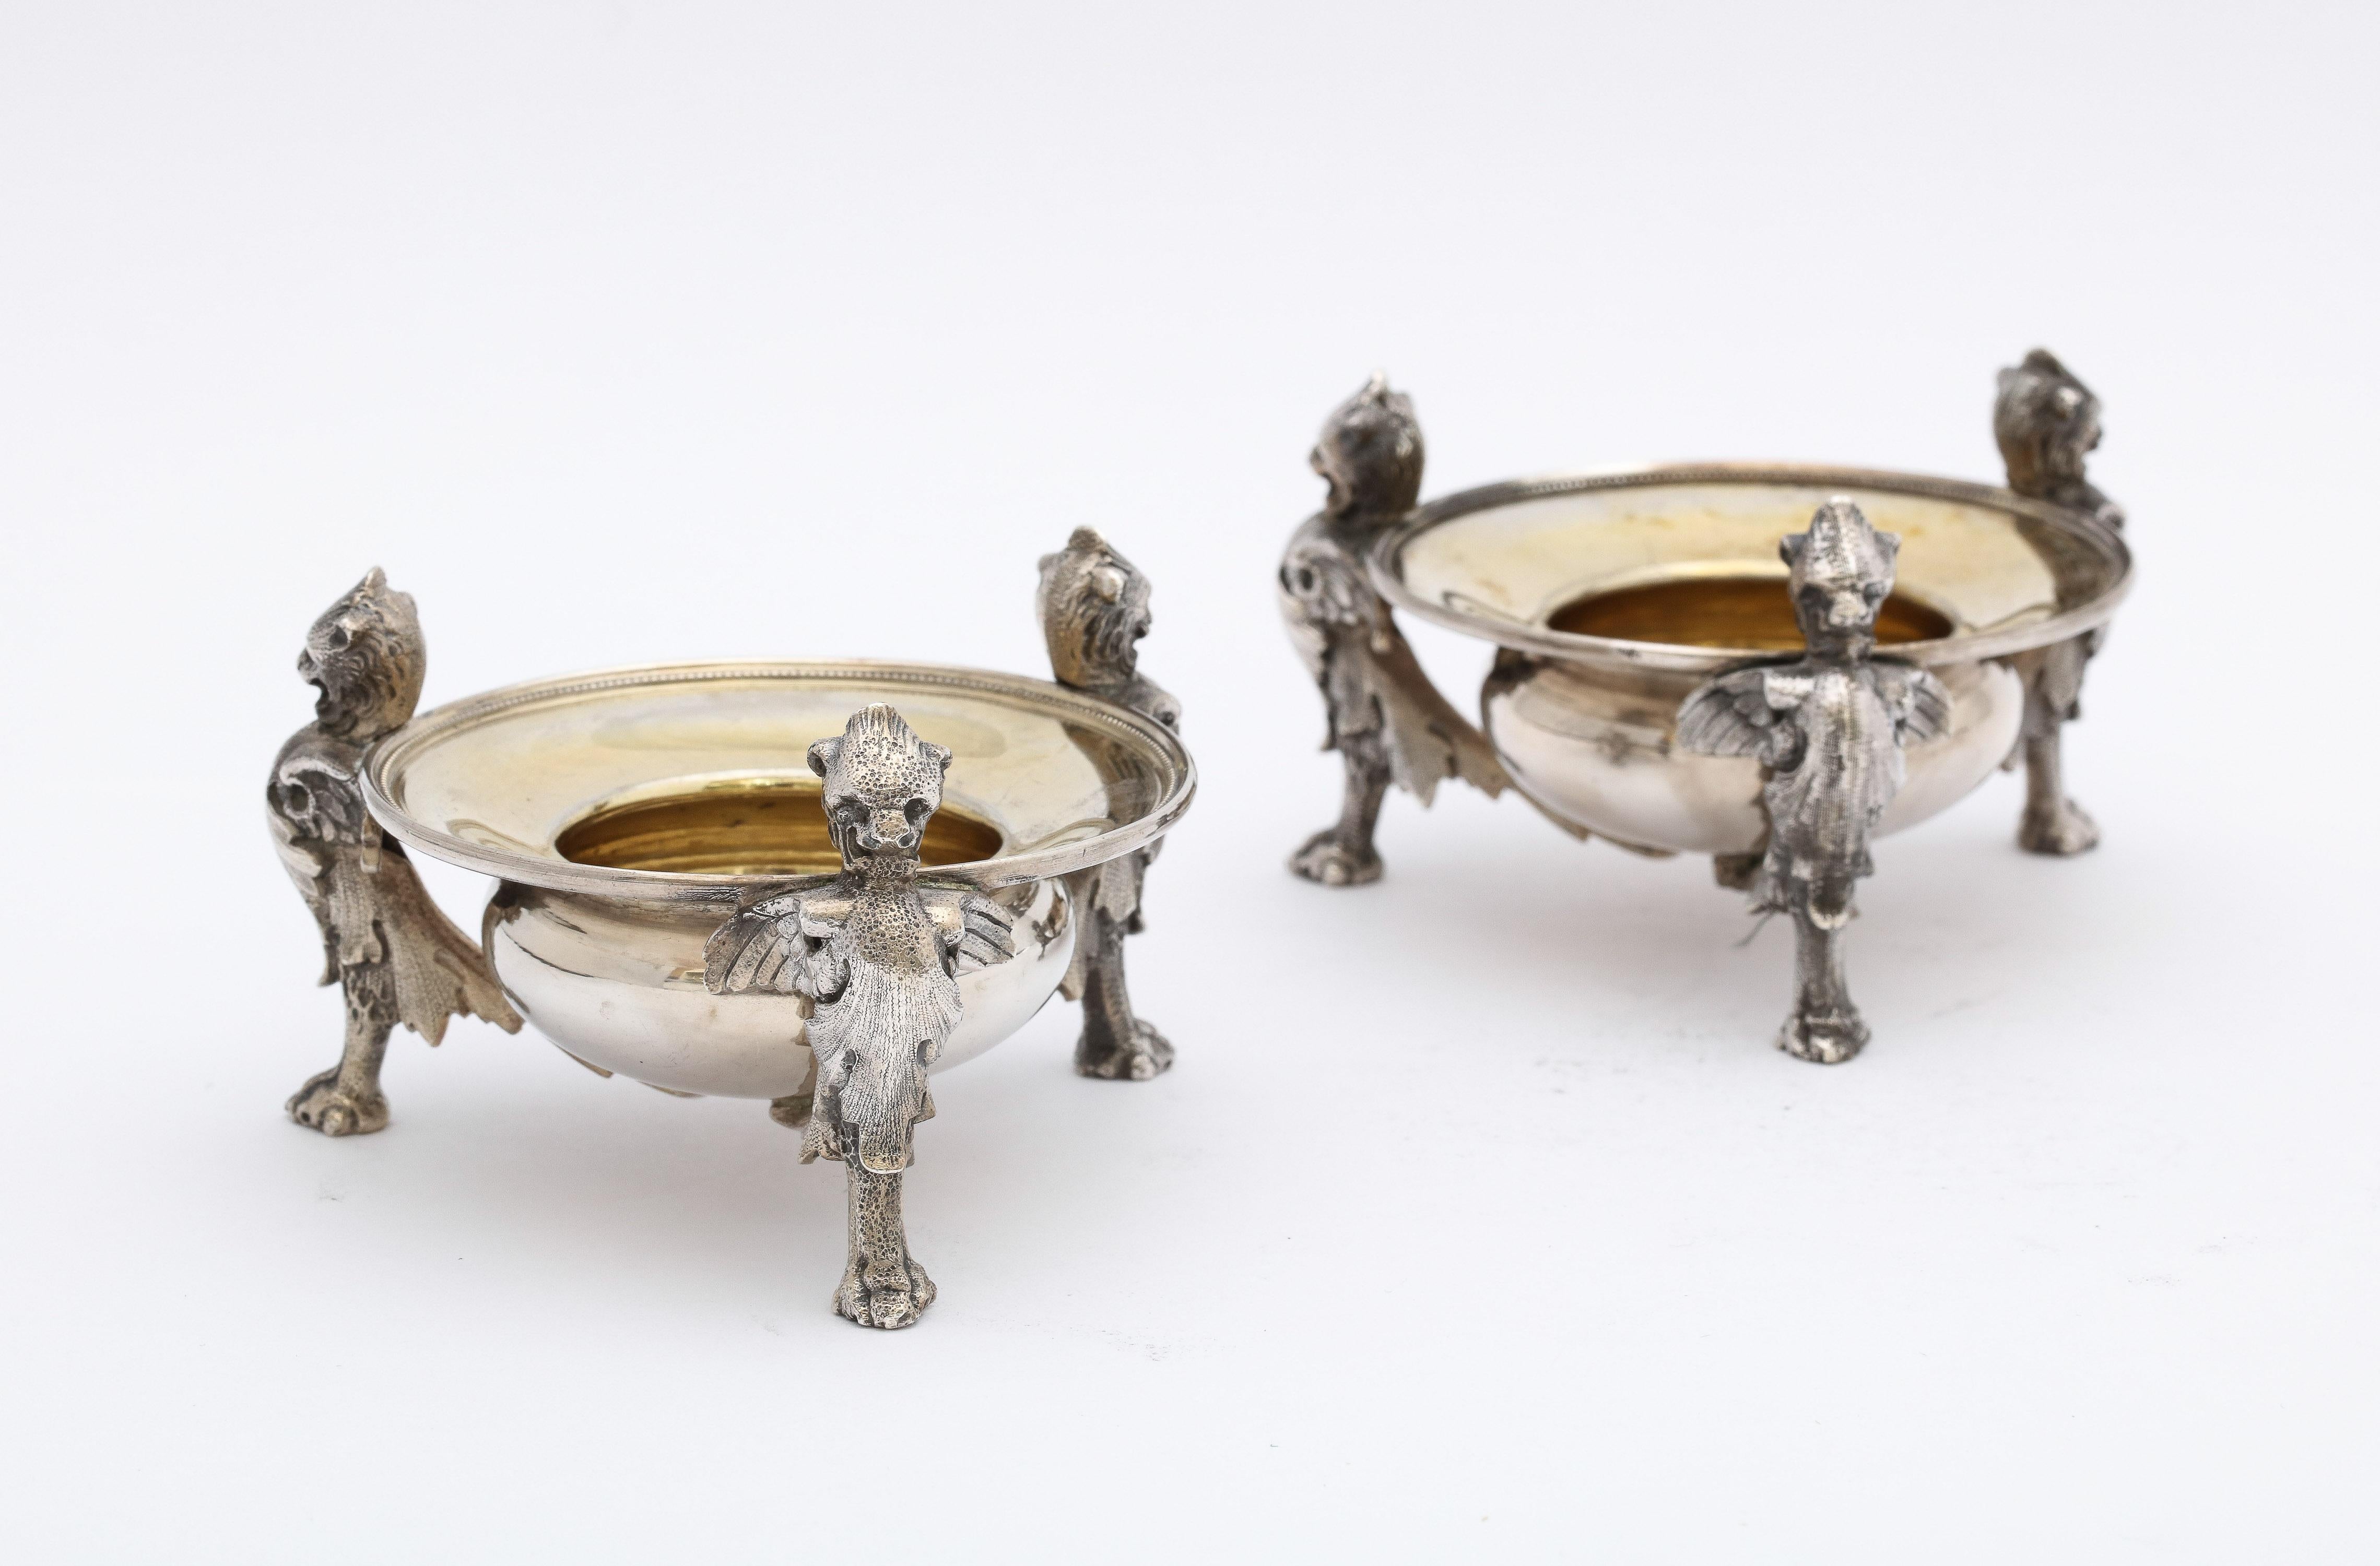 Pair of Neoclassical-Style Parcel Gilt Coin Silver Footed Salt Cellars By Gorham For Sale 8